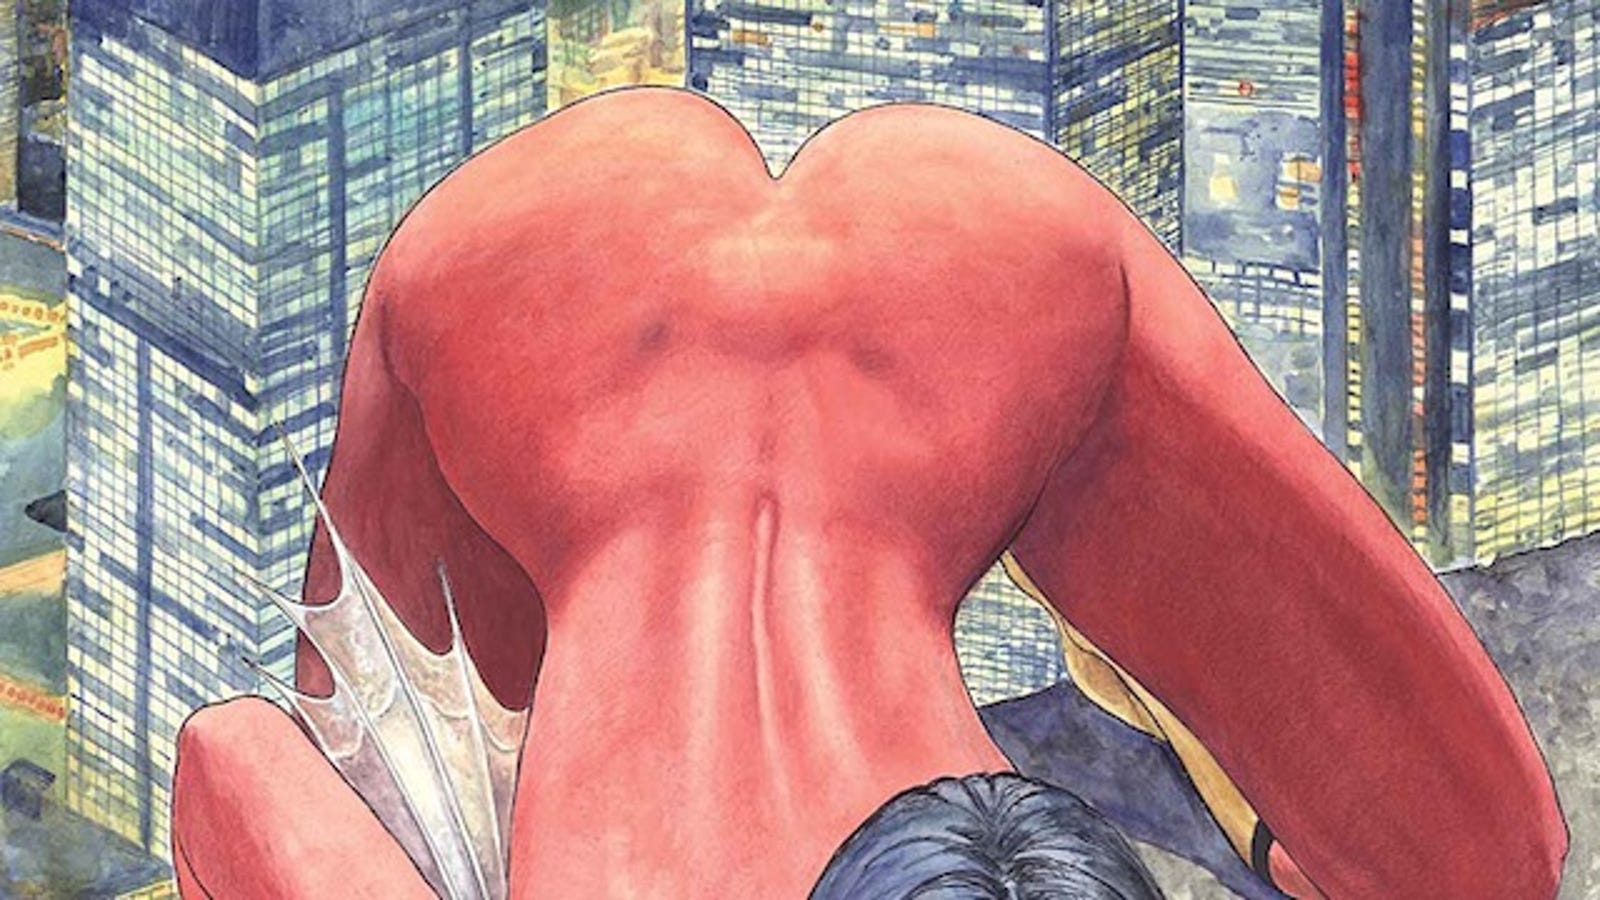 Check Out Spider-Woman #1, Starring Spider-Woman's Ass.